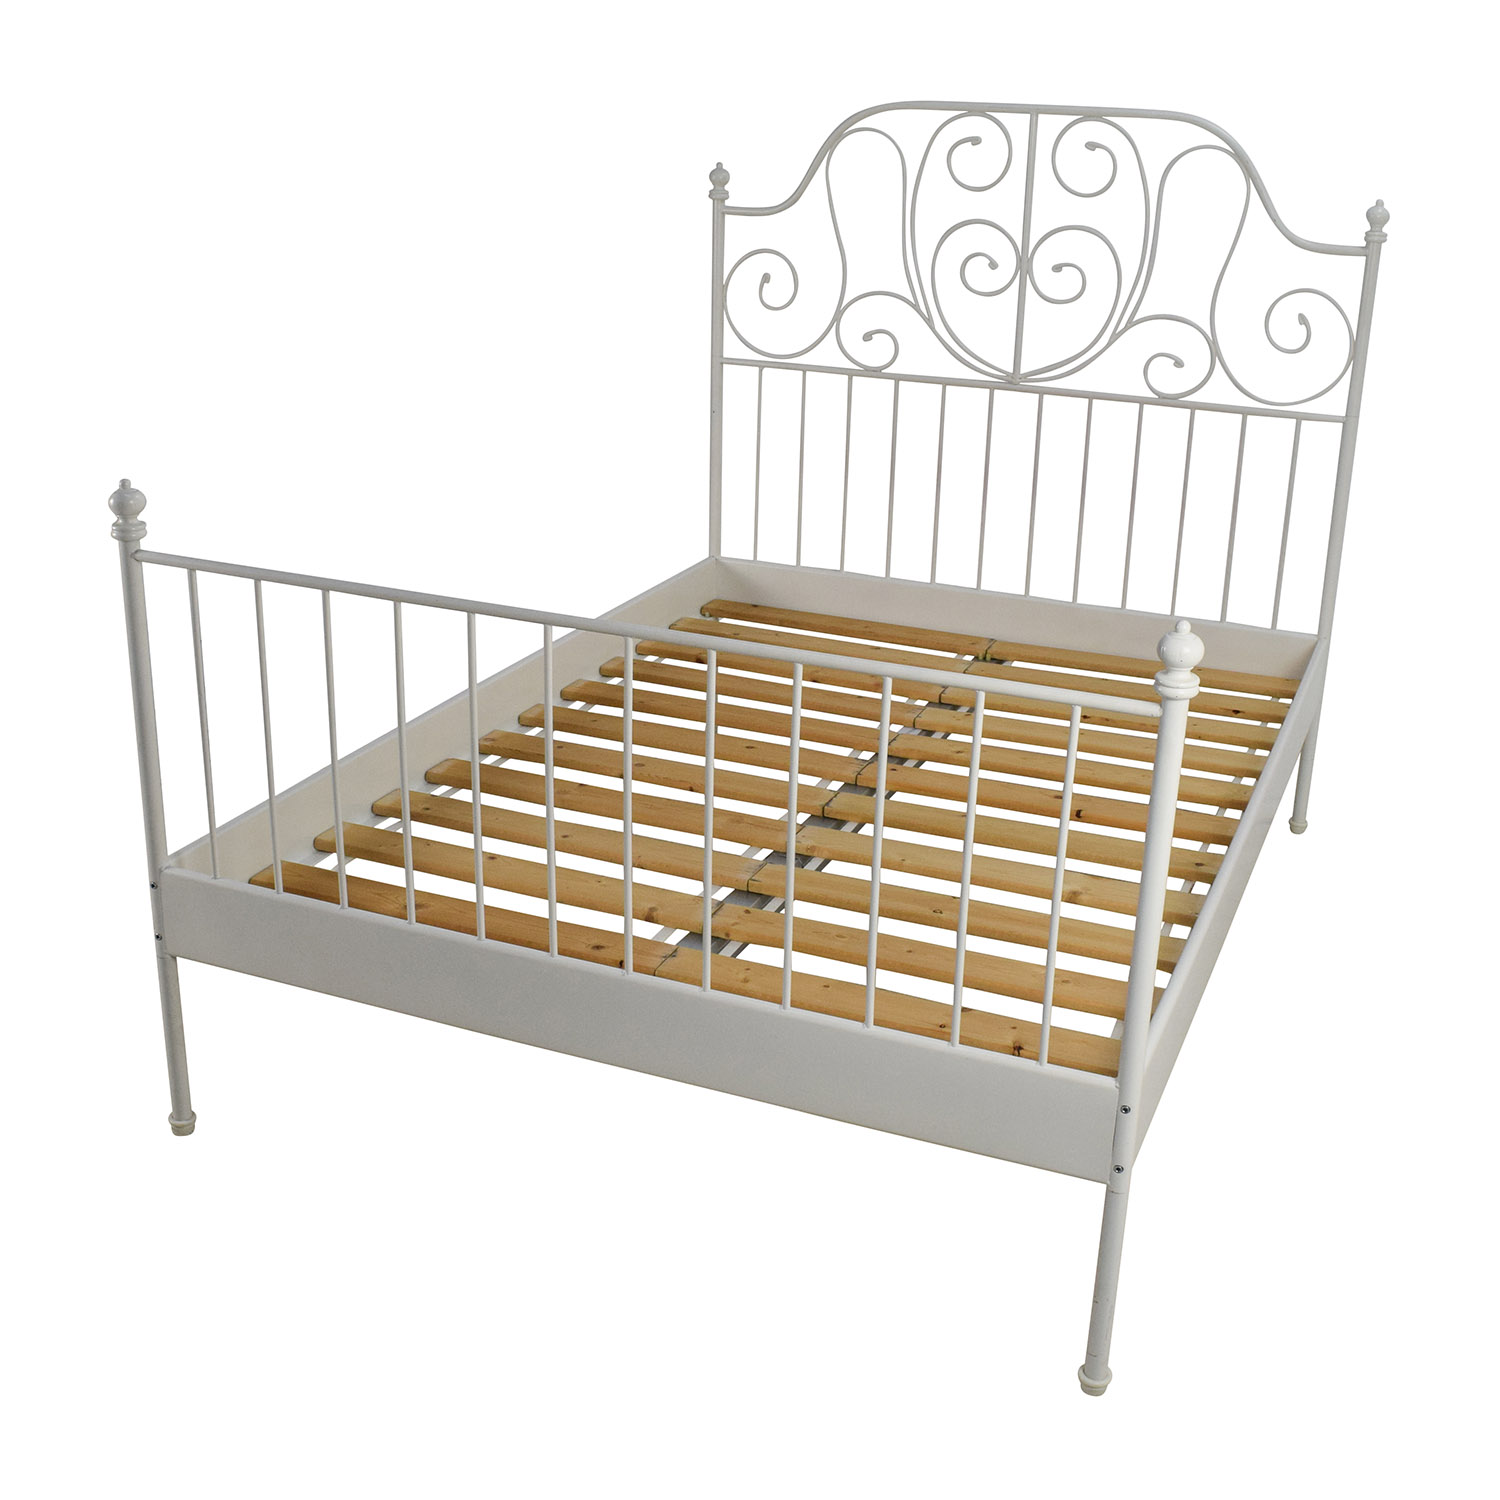 leirvik bed frames ... this bed frame might be just right for you. in YXKTUUL